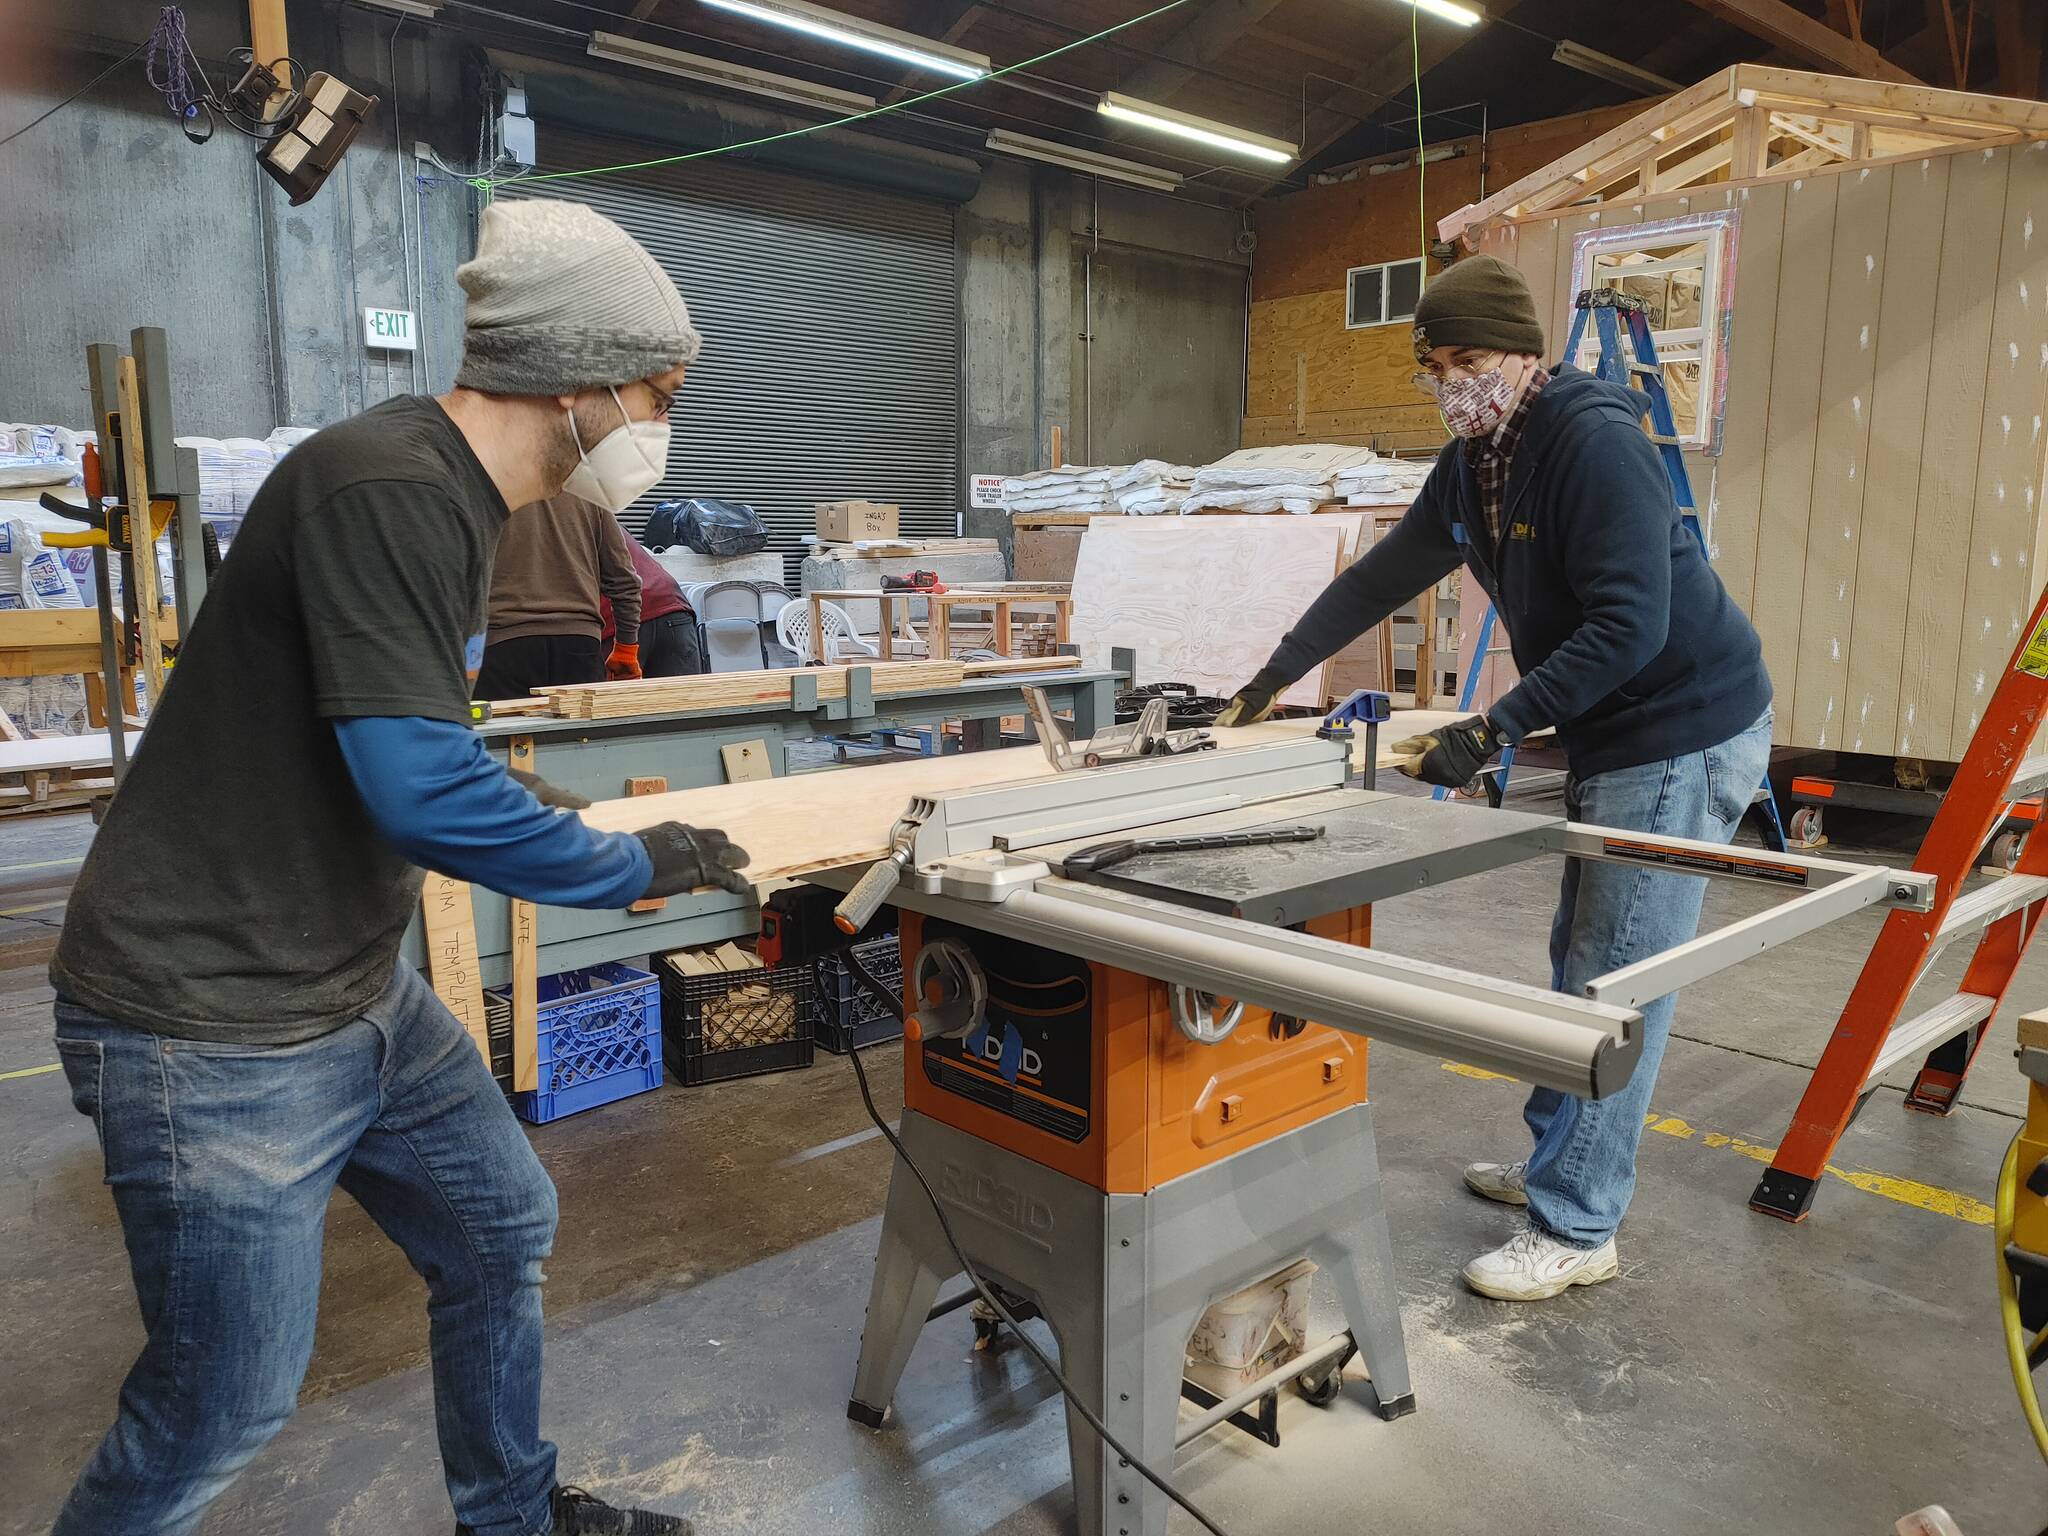 Mercer Islanders Daniel Becker, left, and Ted Weinberg get in some sawing action while building part of a tiny house on Jan. 15 at the Low Income Housing Institute factory in south Seattle. Andy Nystrom/ staff photo